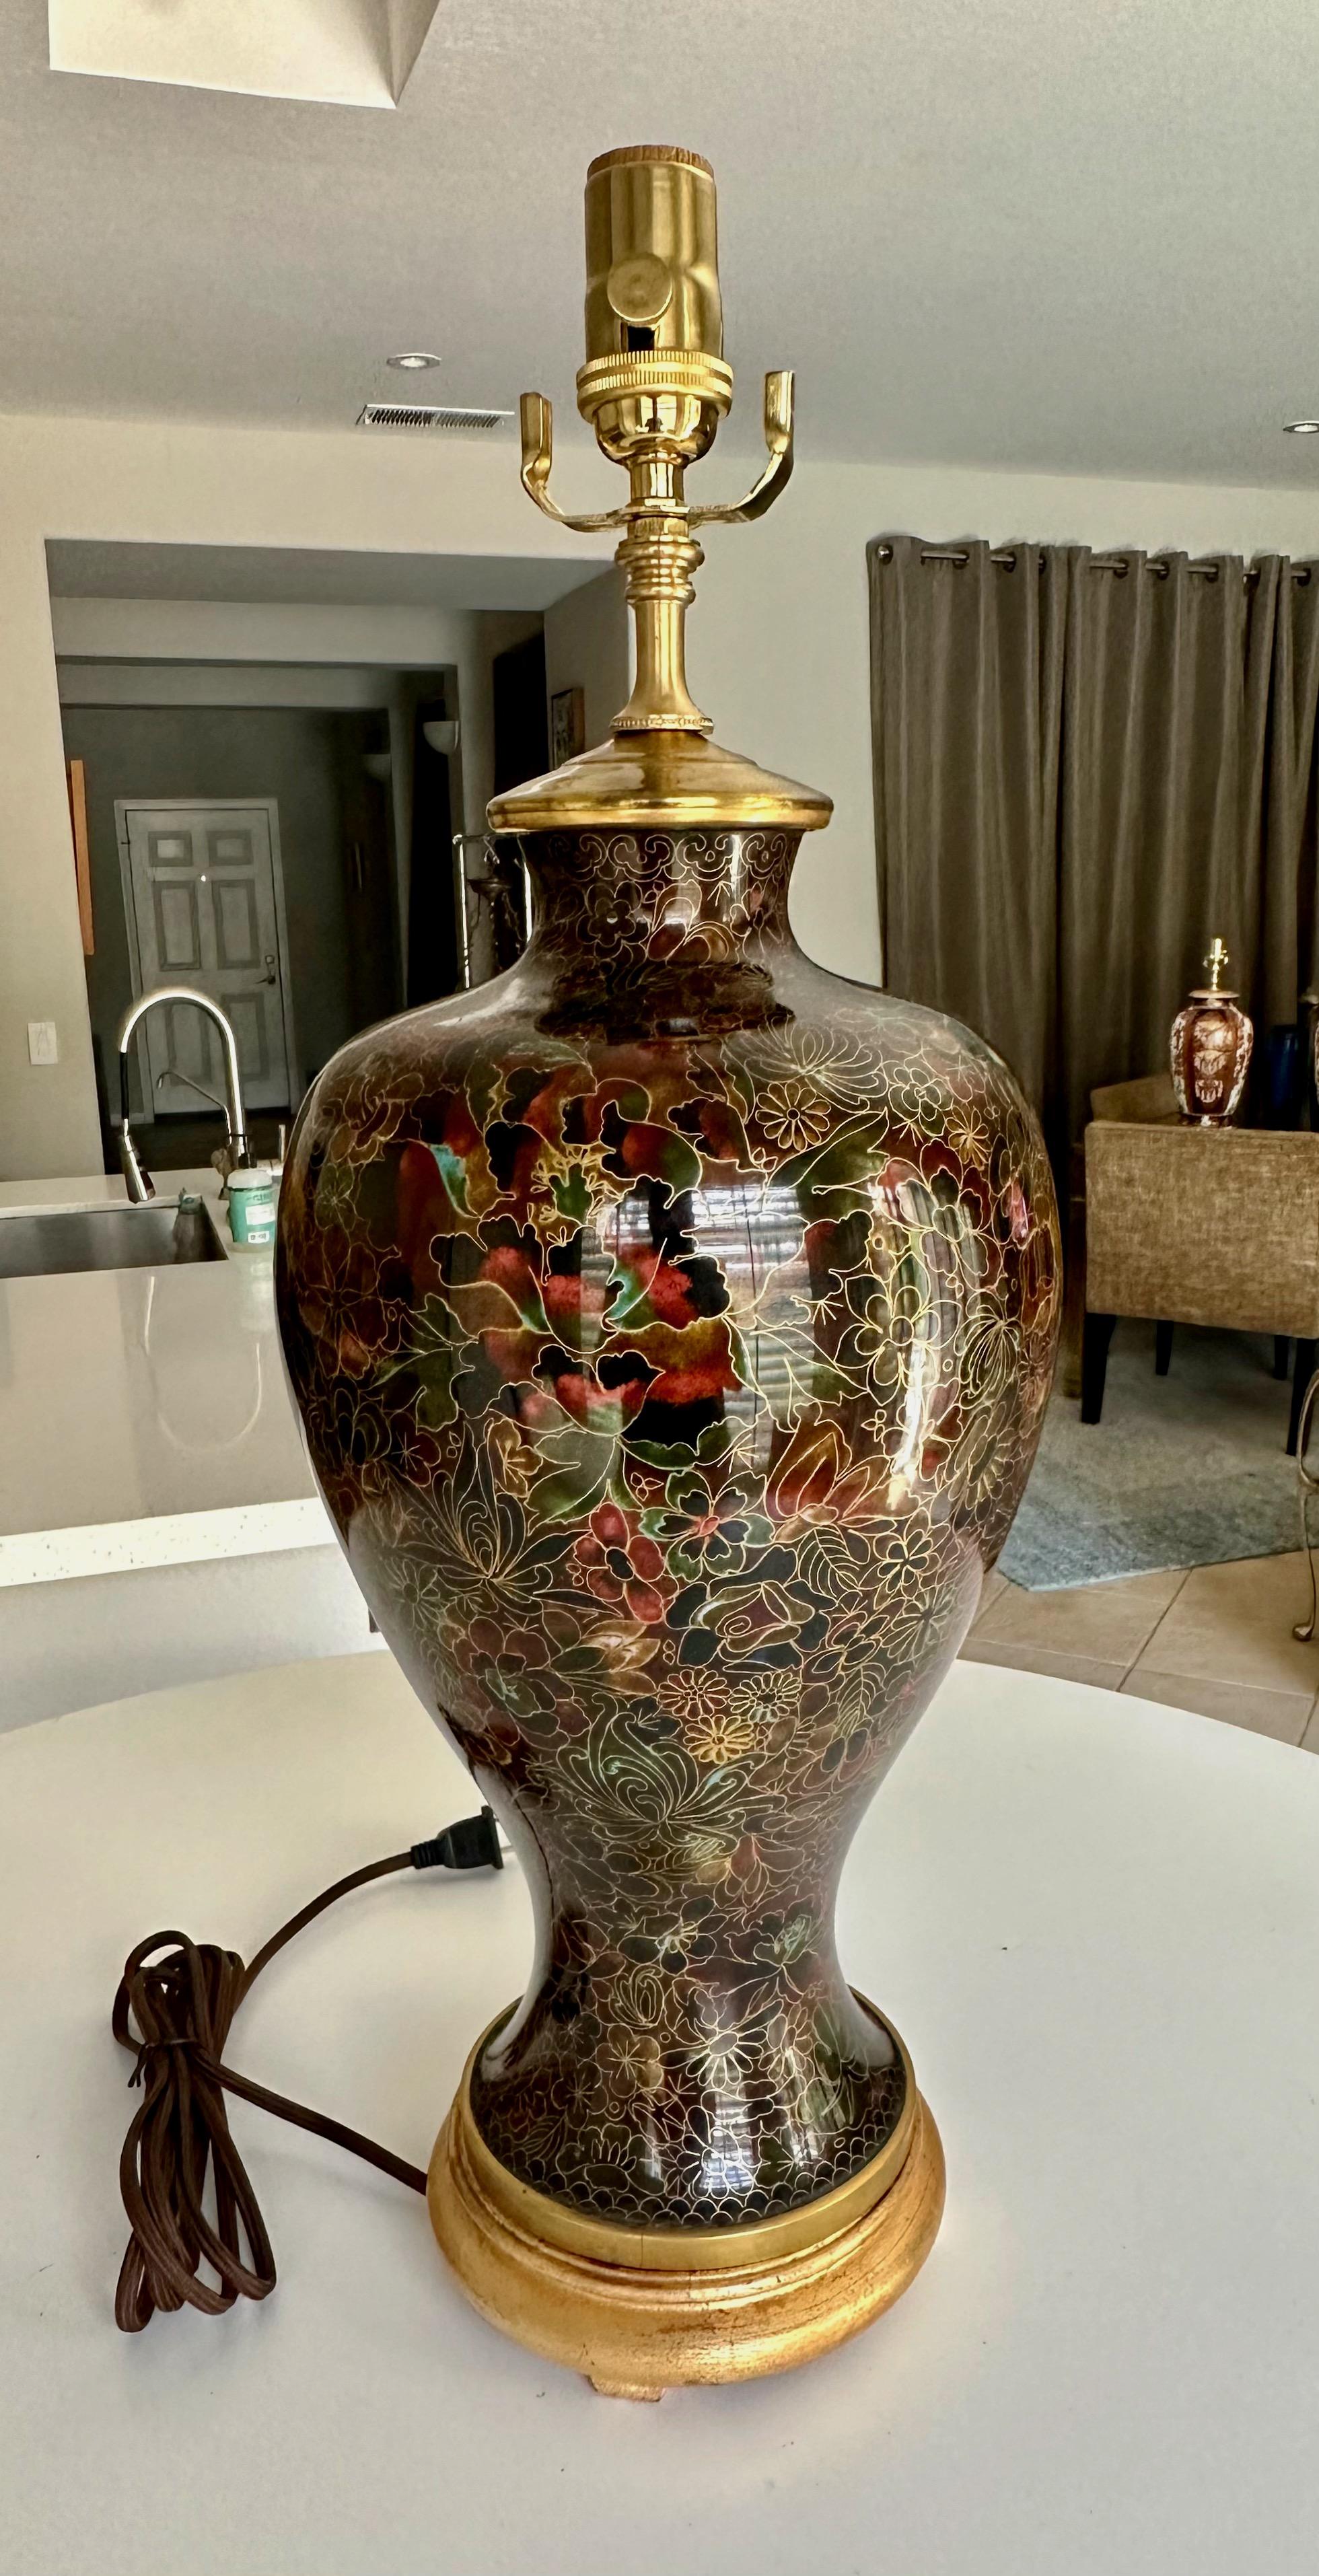 Single Chinese Cloisonné table lamp mounted mounted on giltwood base. Nicely designed with black floral motif with hints of green and red. Rewired with new 3-way socket and rayon cord. 
Shade not included.